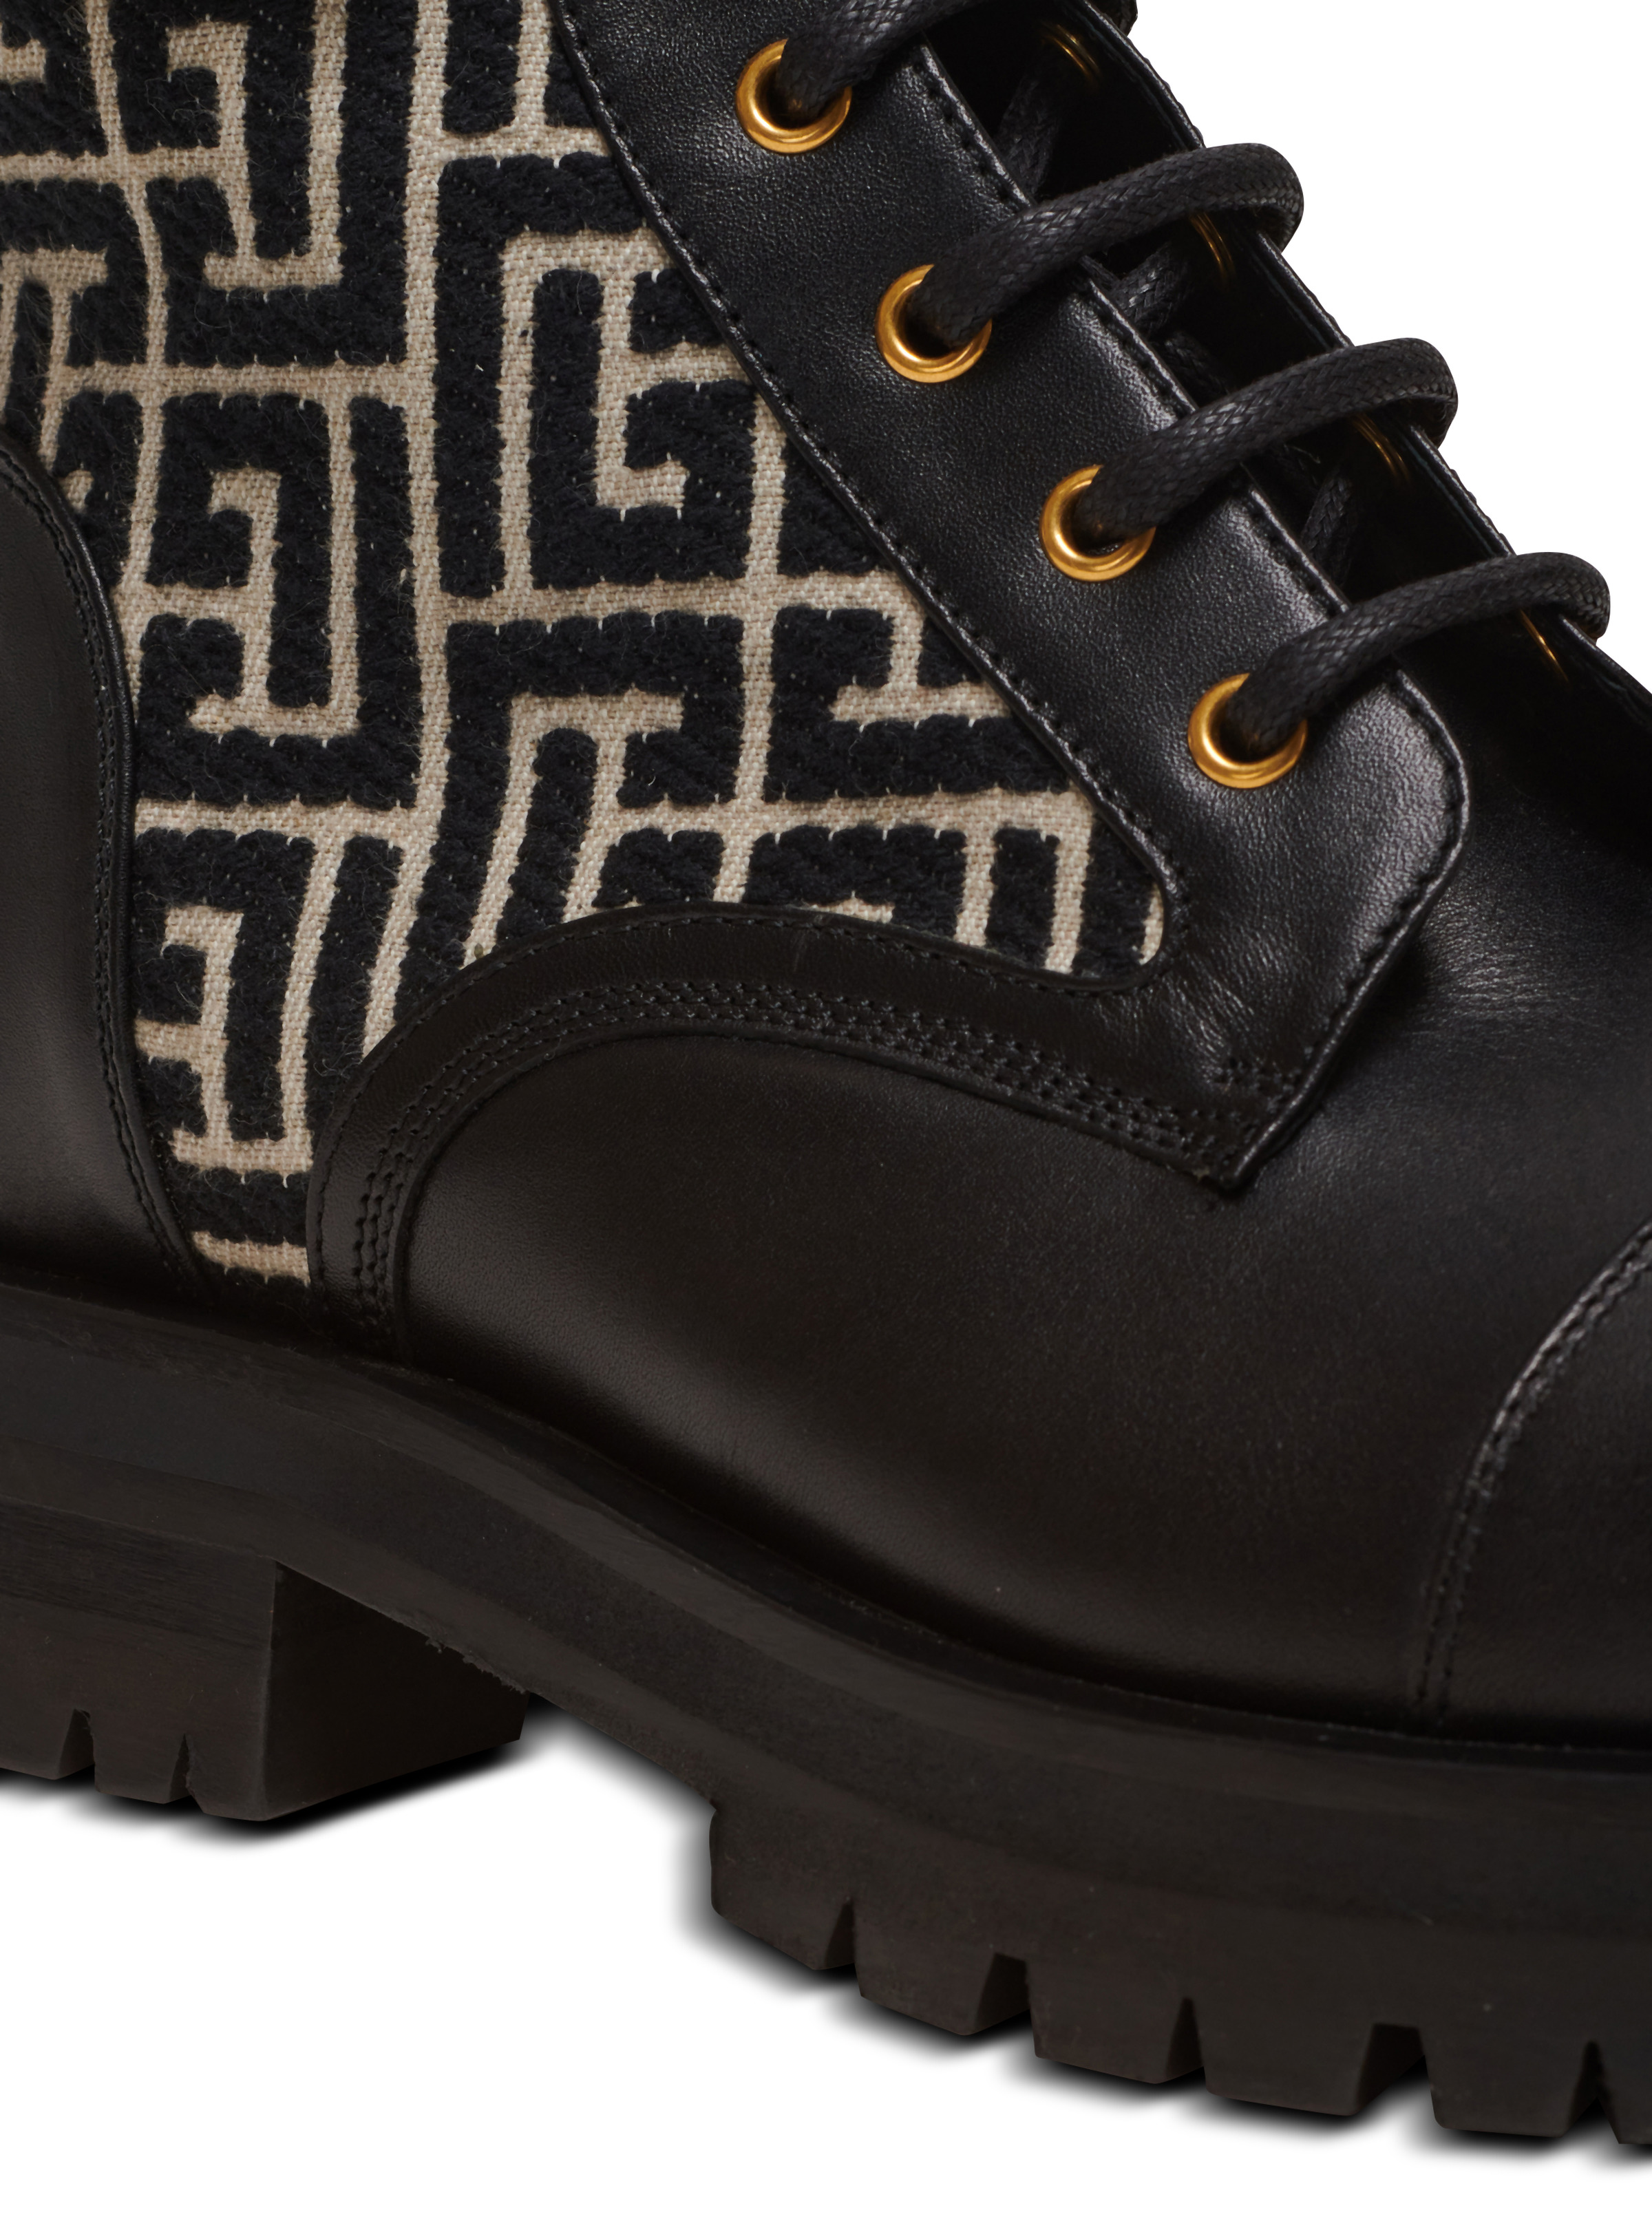 Charlie monogram jacquard and leather ranger boots - 7